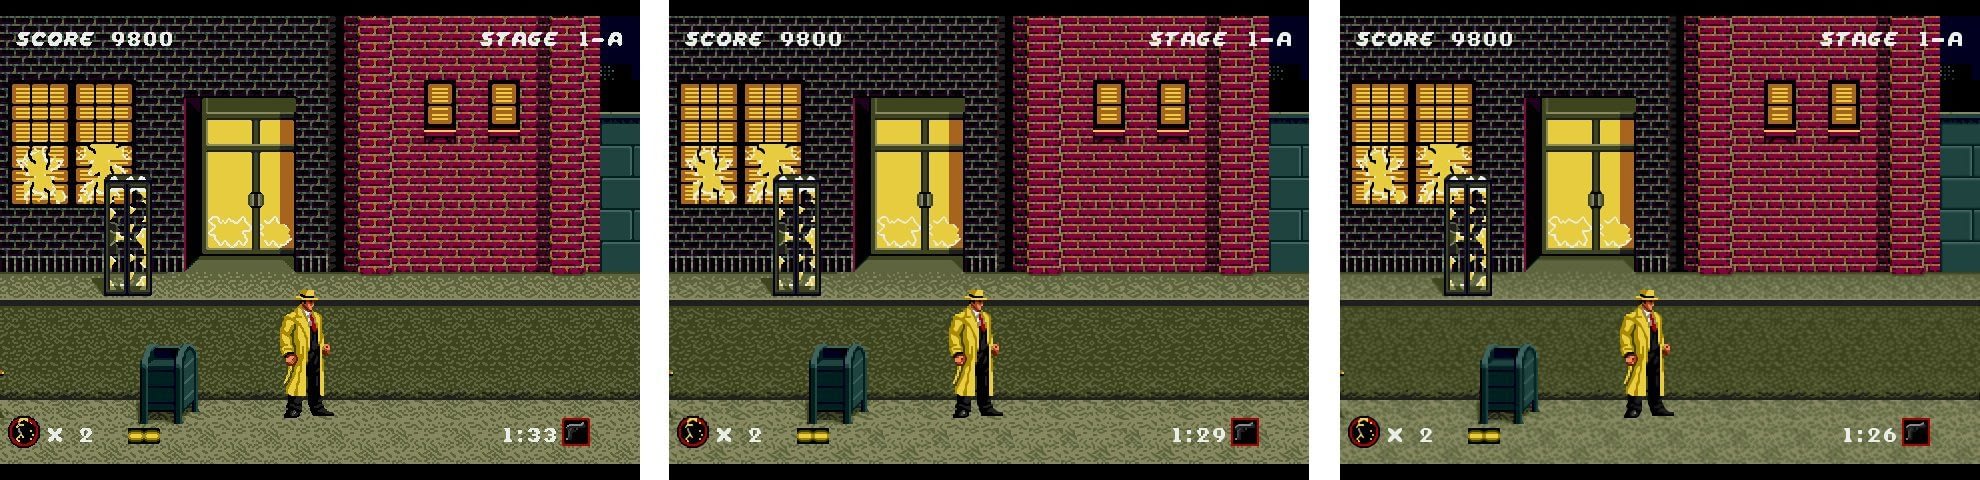 9-Retron-5-Dick-Tracy-Filter